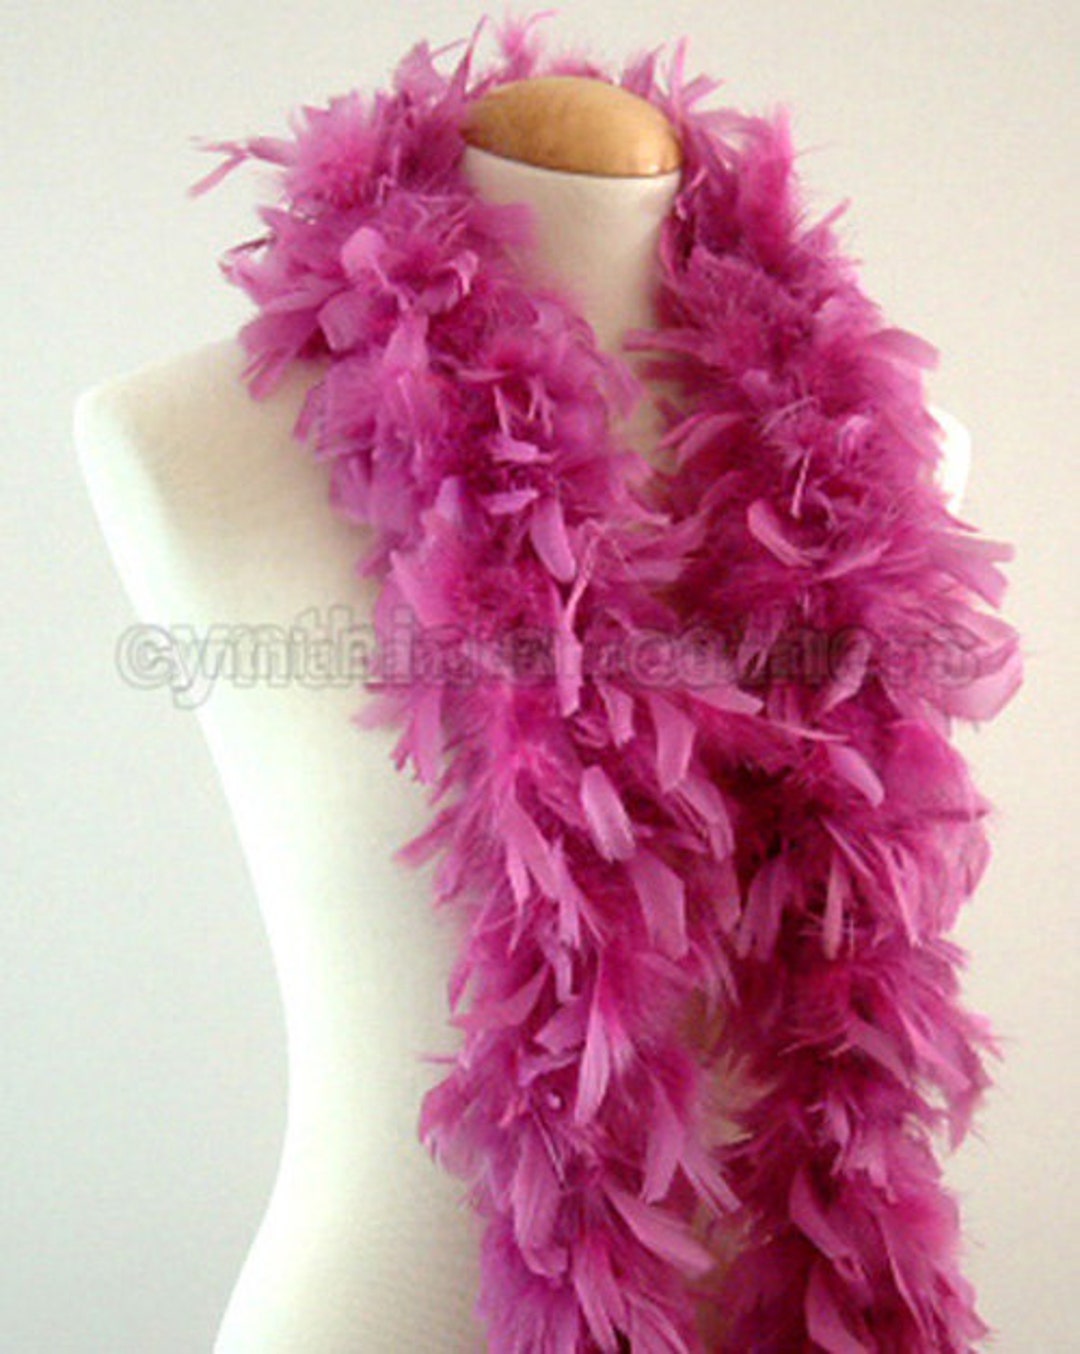 Thick 120g Chandelle Feather Boa PURPLE 6 ft Costume/Craft Making